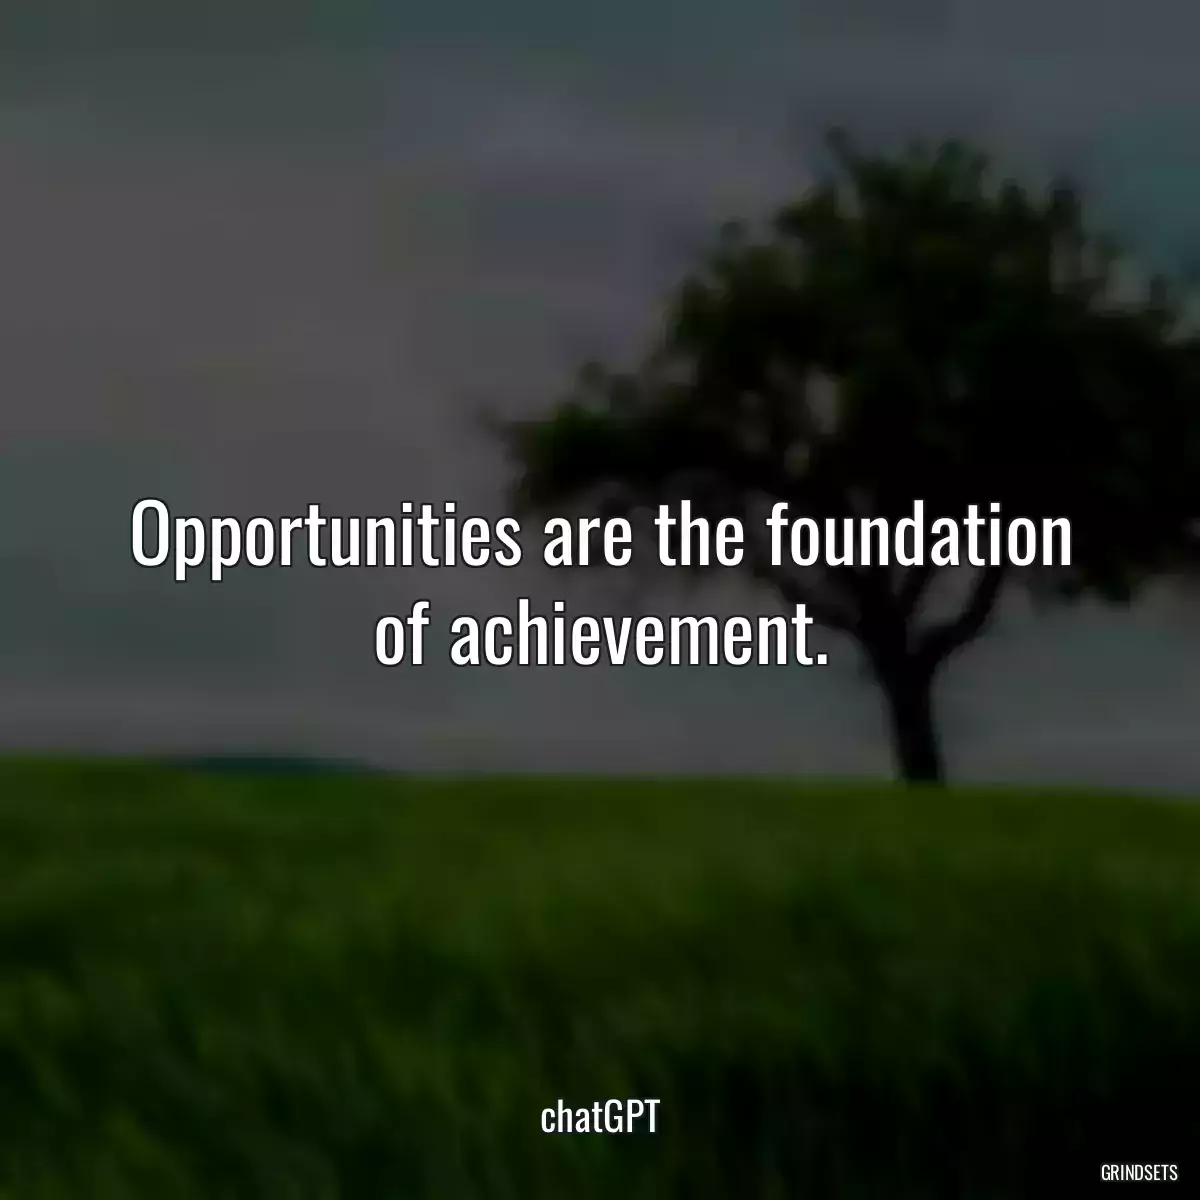 Opportunities are the foundation of achievement.